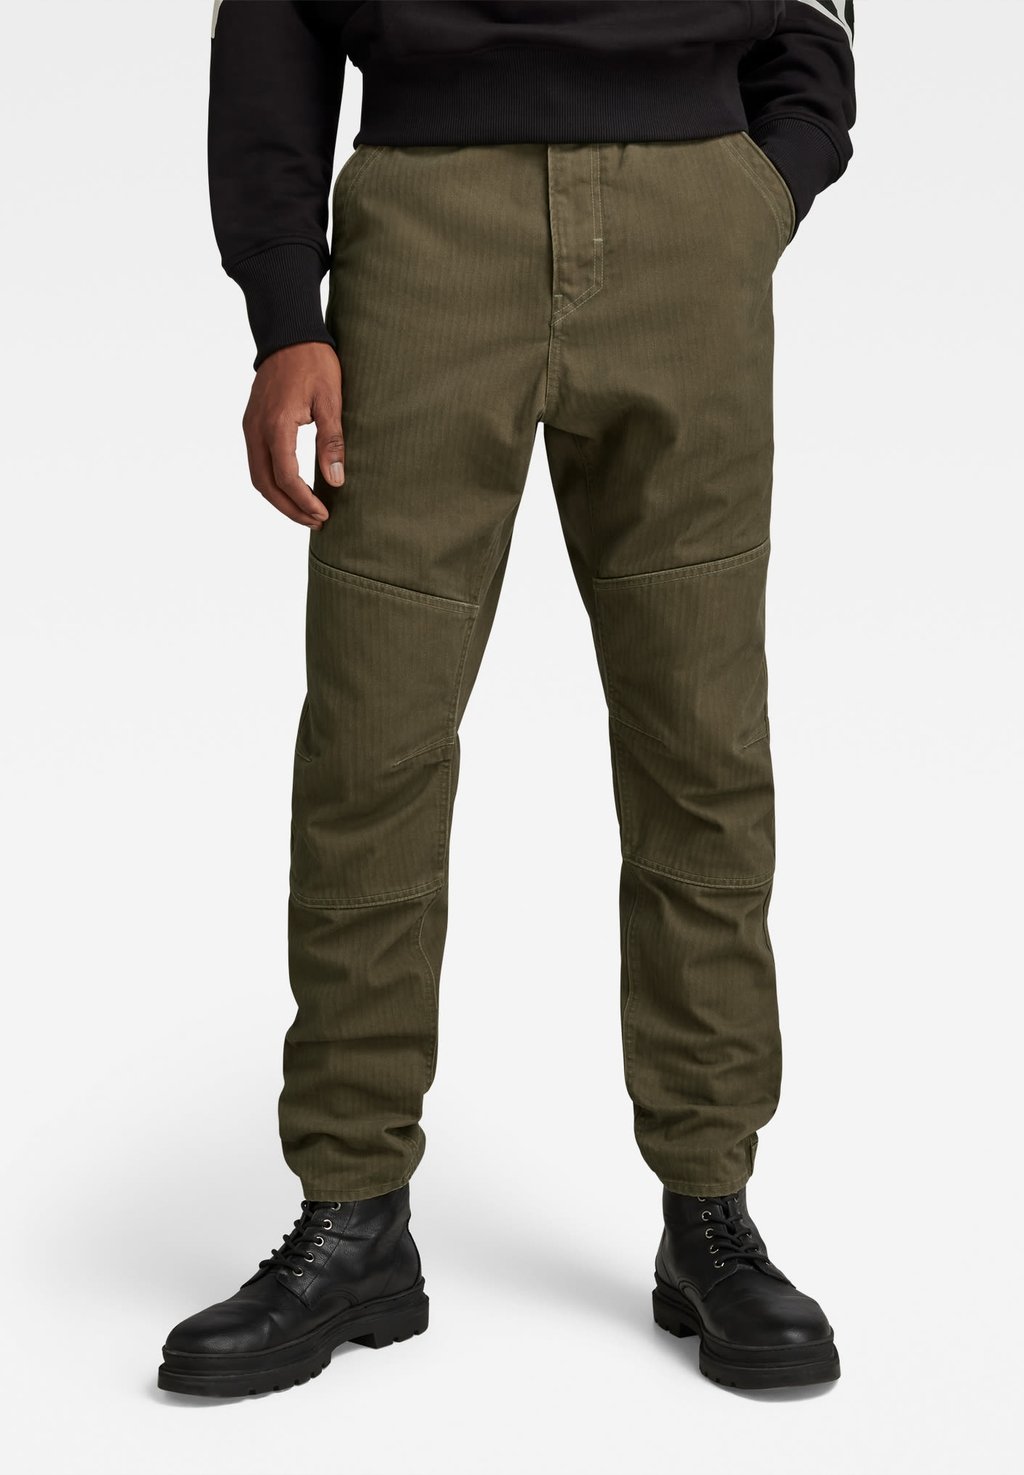 Брюки FATIGUE PANT G-Star, цвет famous brushed hb r o/shadow olive